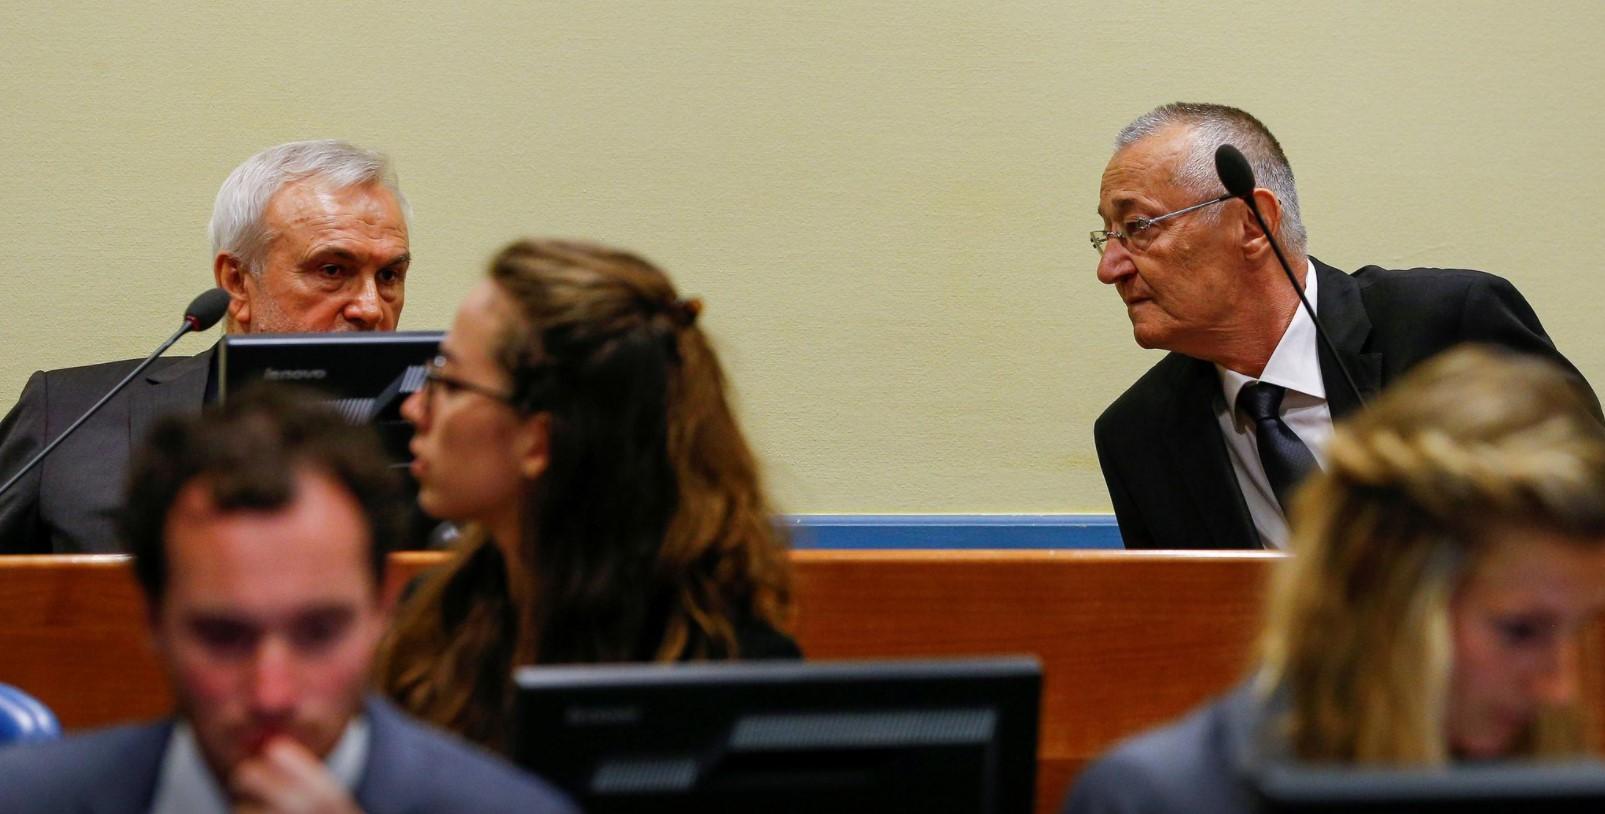 Jovica Stanišić (L) and Franko Simatović appear in court for their re-trial at the United Nations tribunal for the former Yugoslavia in The Hague, June 13, 2017. - Avaz